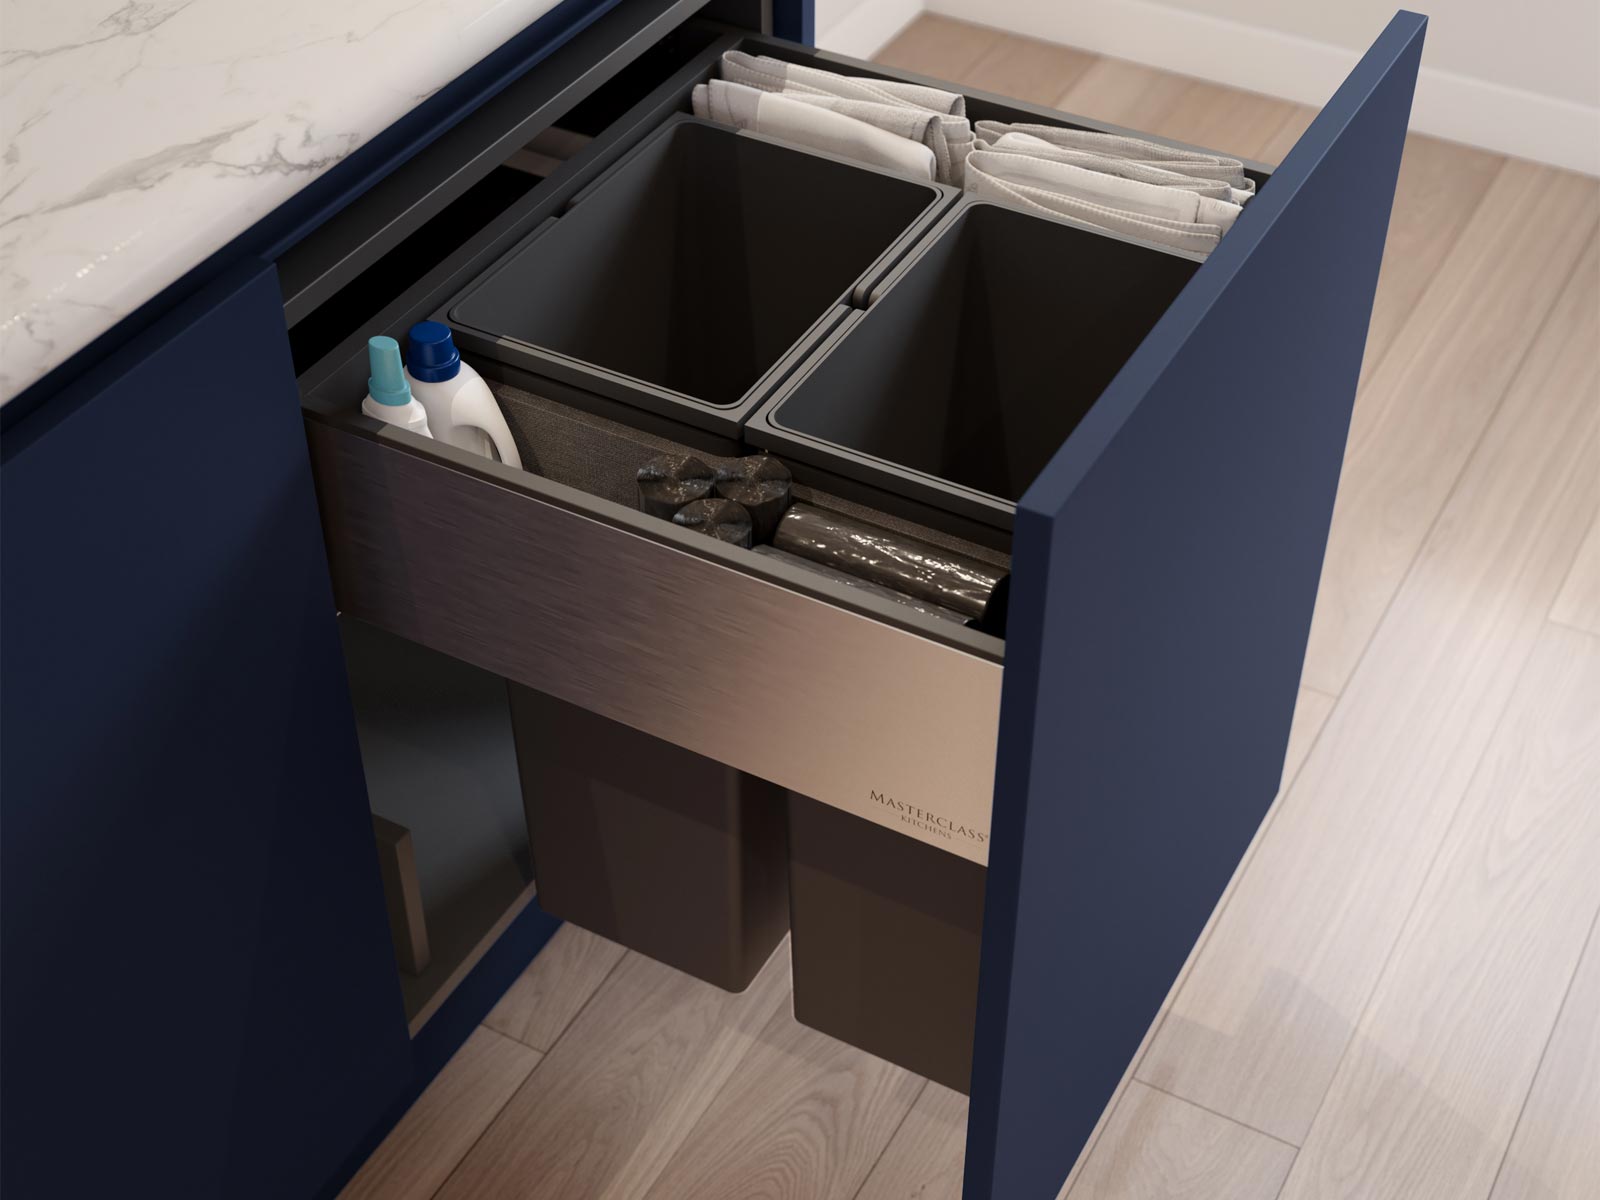 A double kitchen bin with laundry tablet storage and bin bag holders